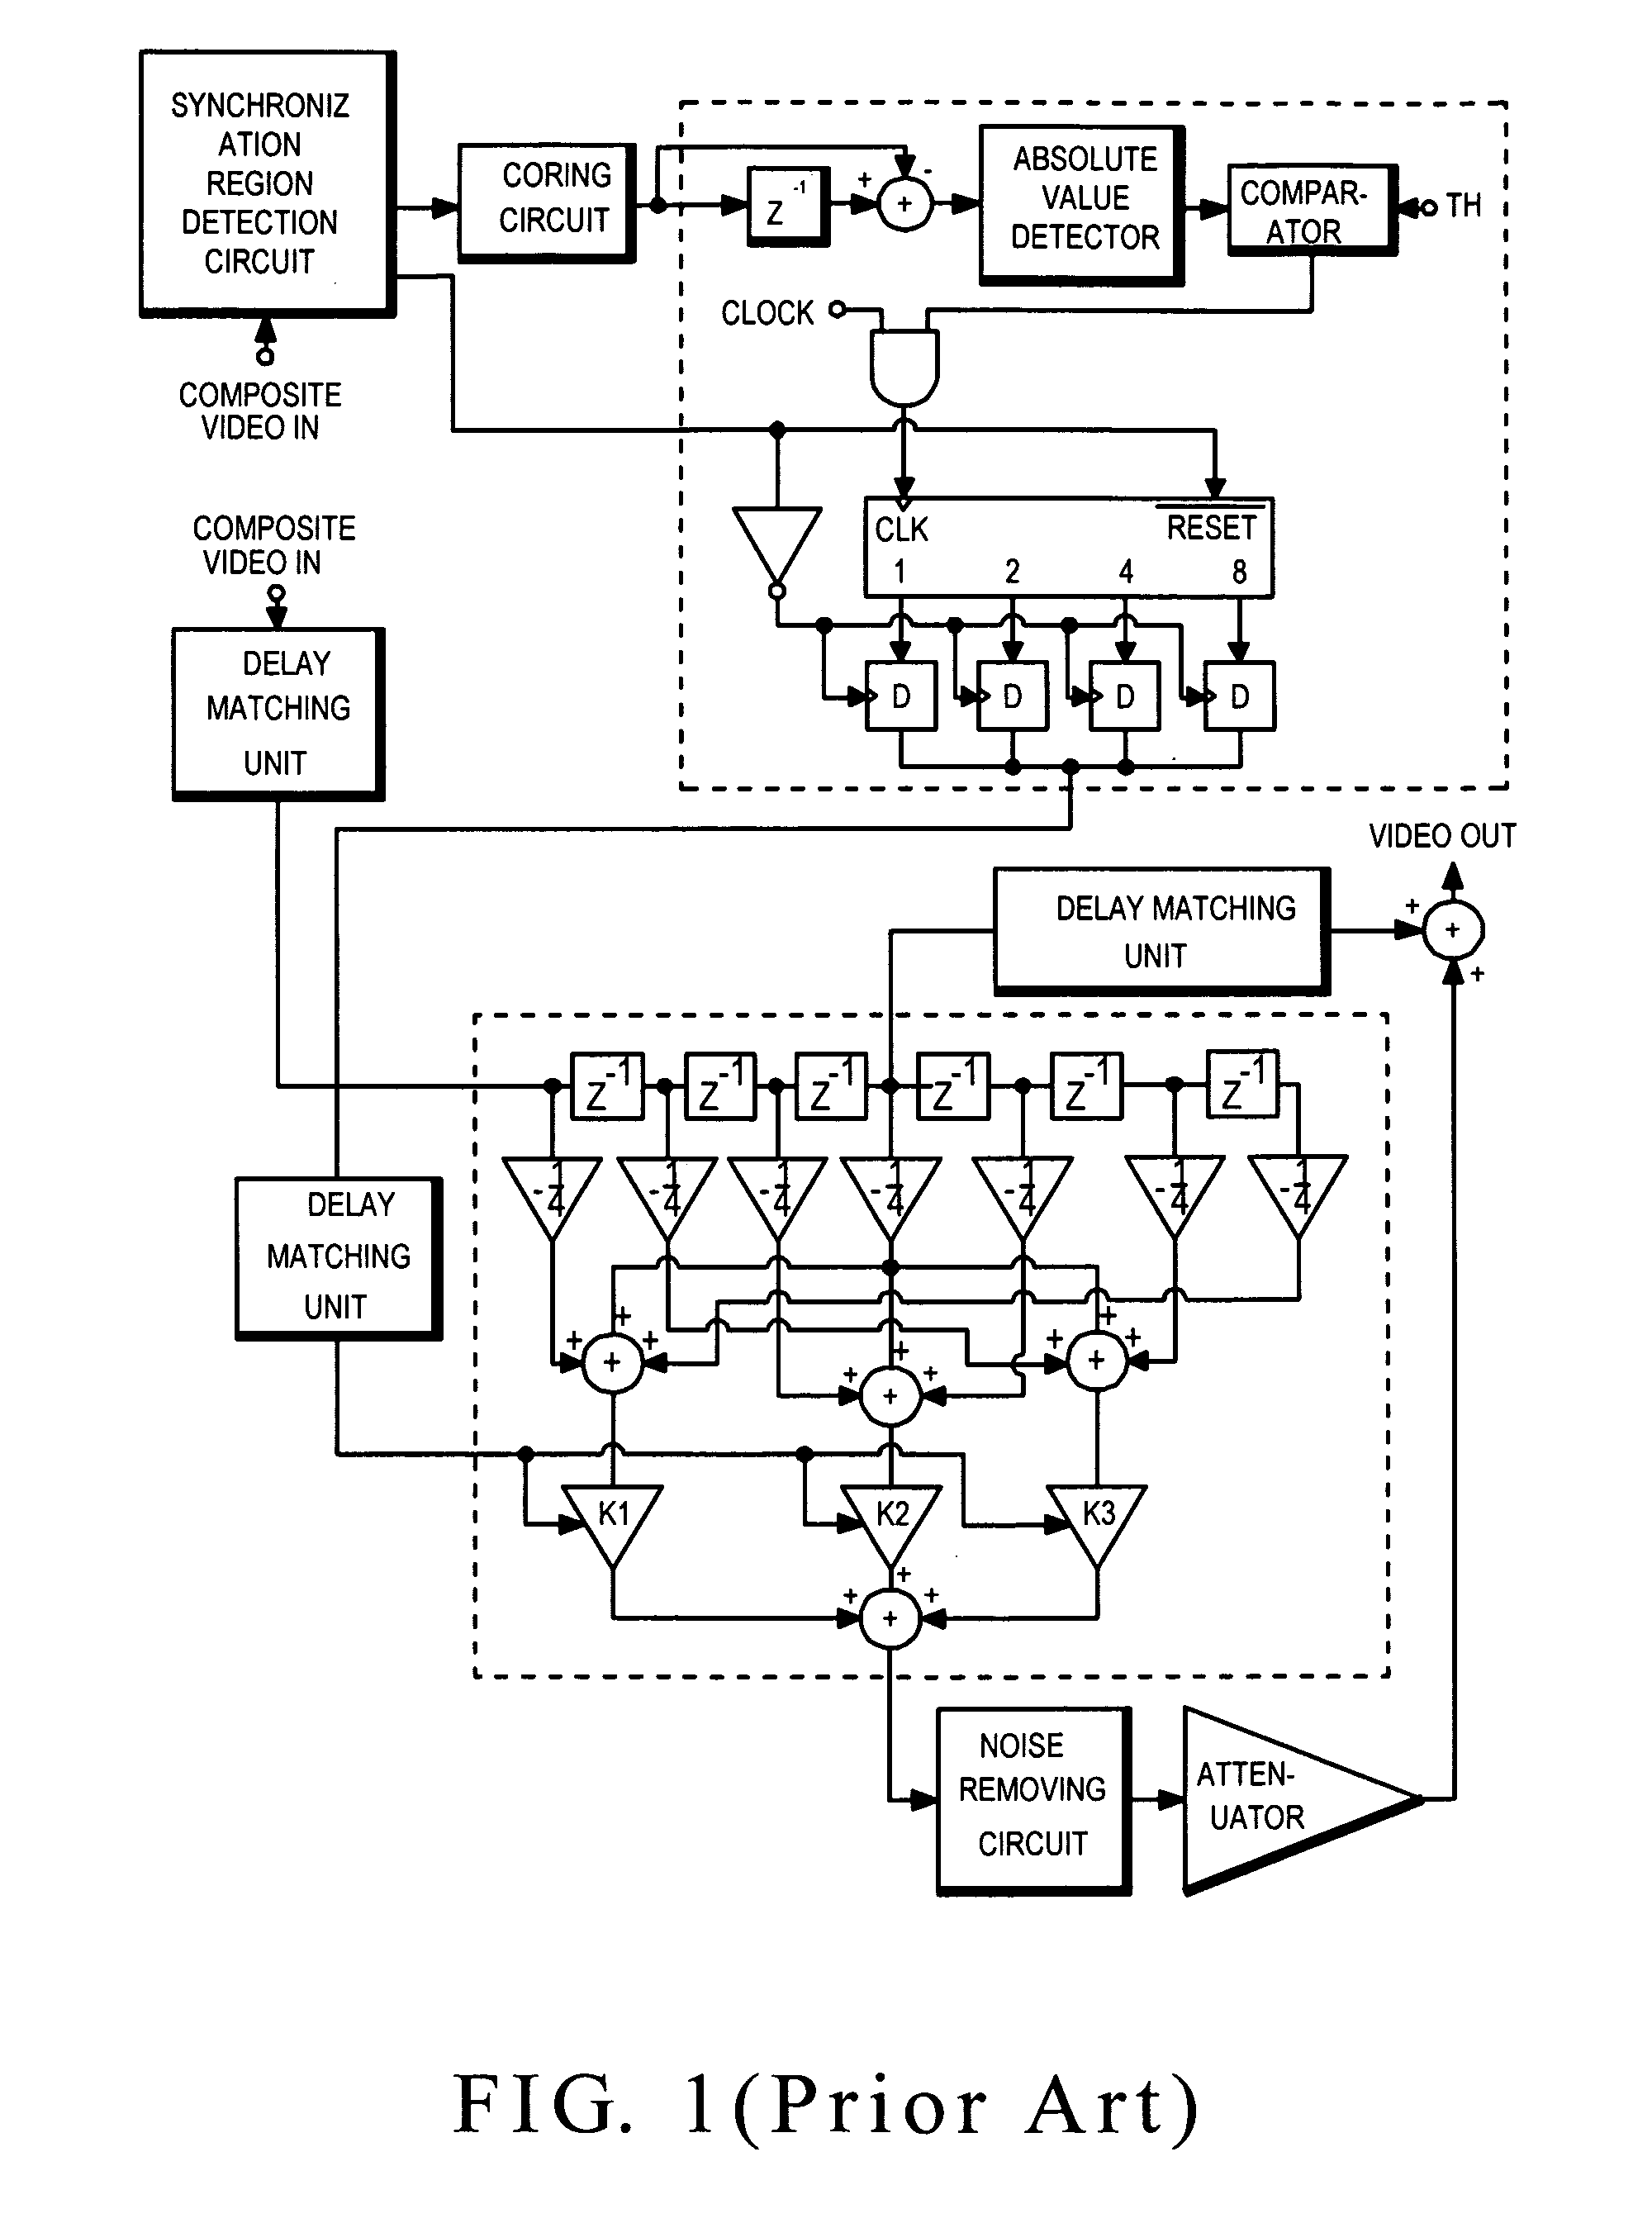 System for applying multi-direction and multi-slope region detection to image edge enhancement